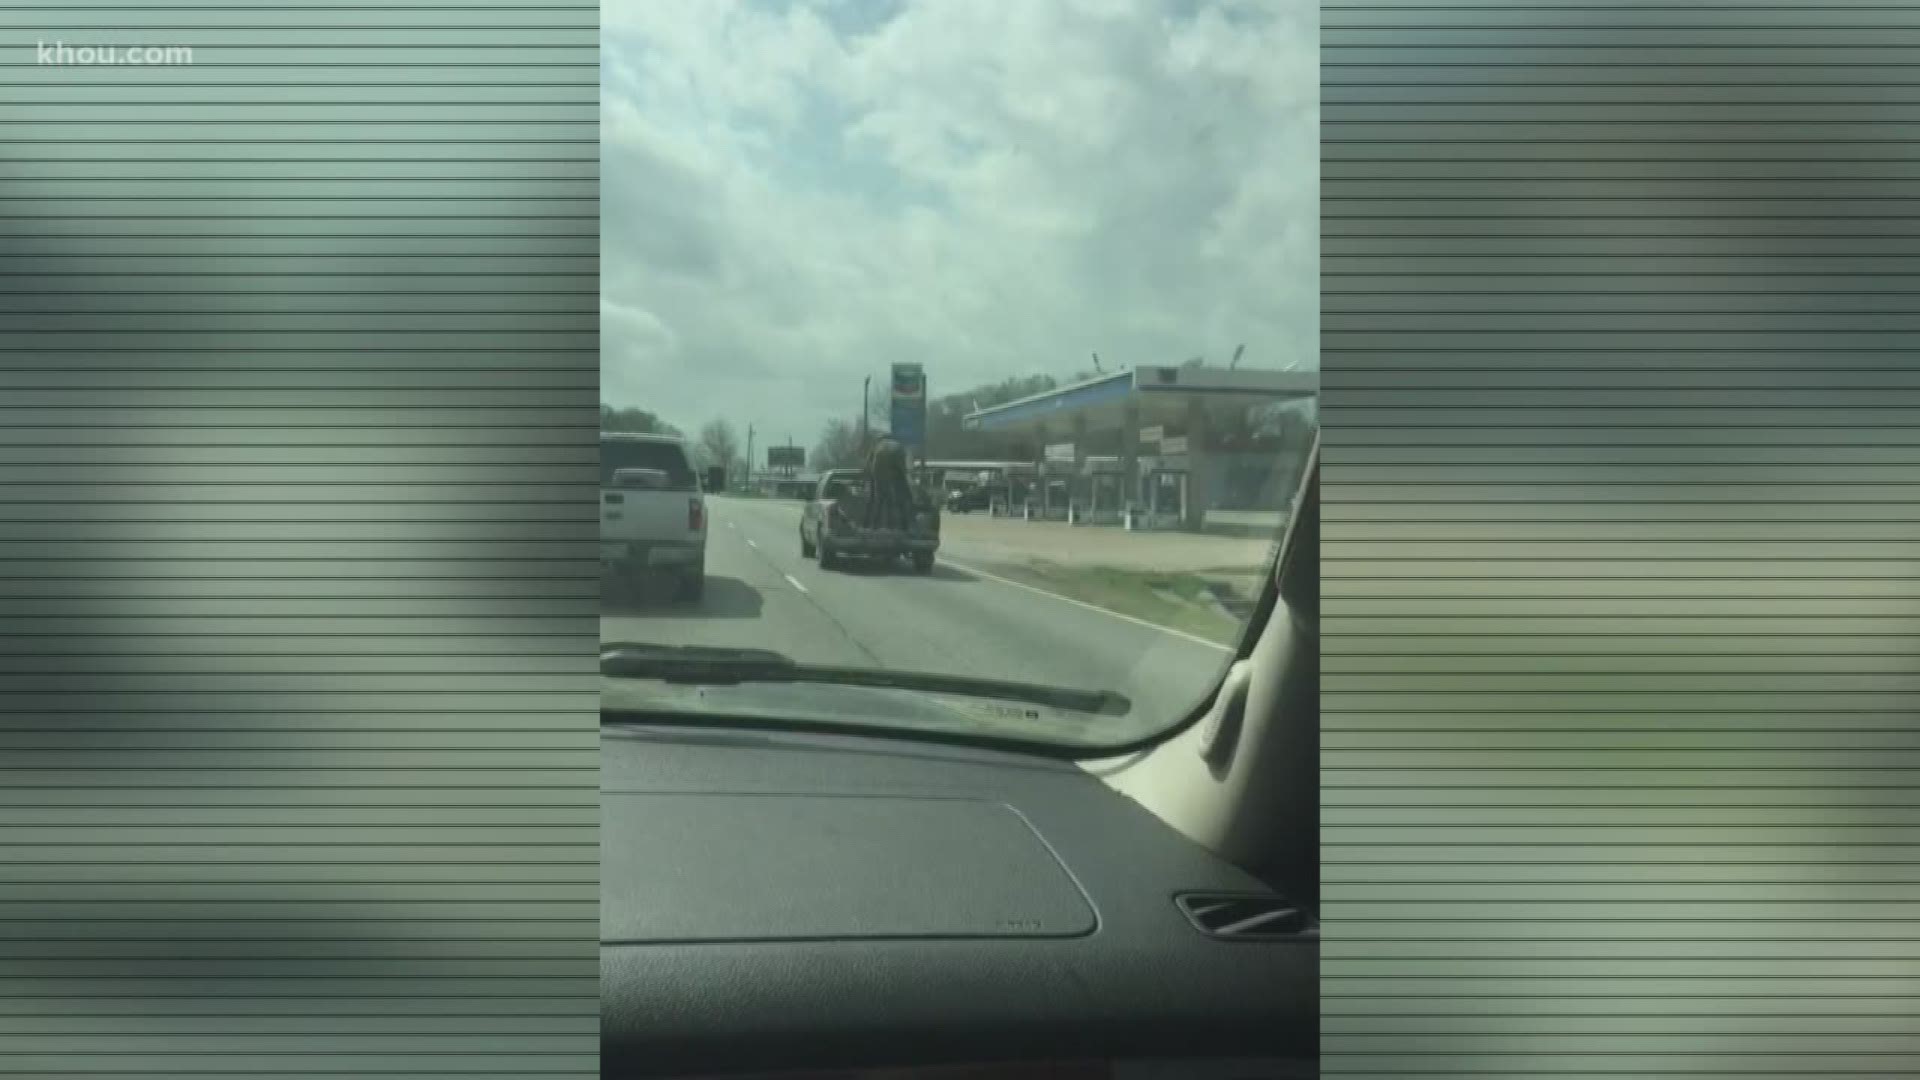 Someone in Texas was caught on video over the weekend transporting a horse in the back of a regular pickup truck. Not in a trailer - in the bed of the truck.